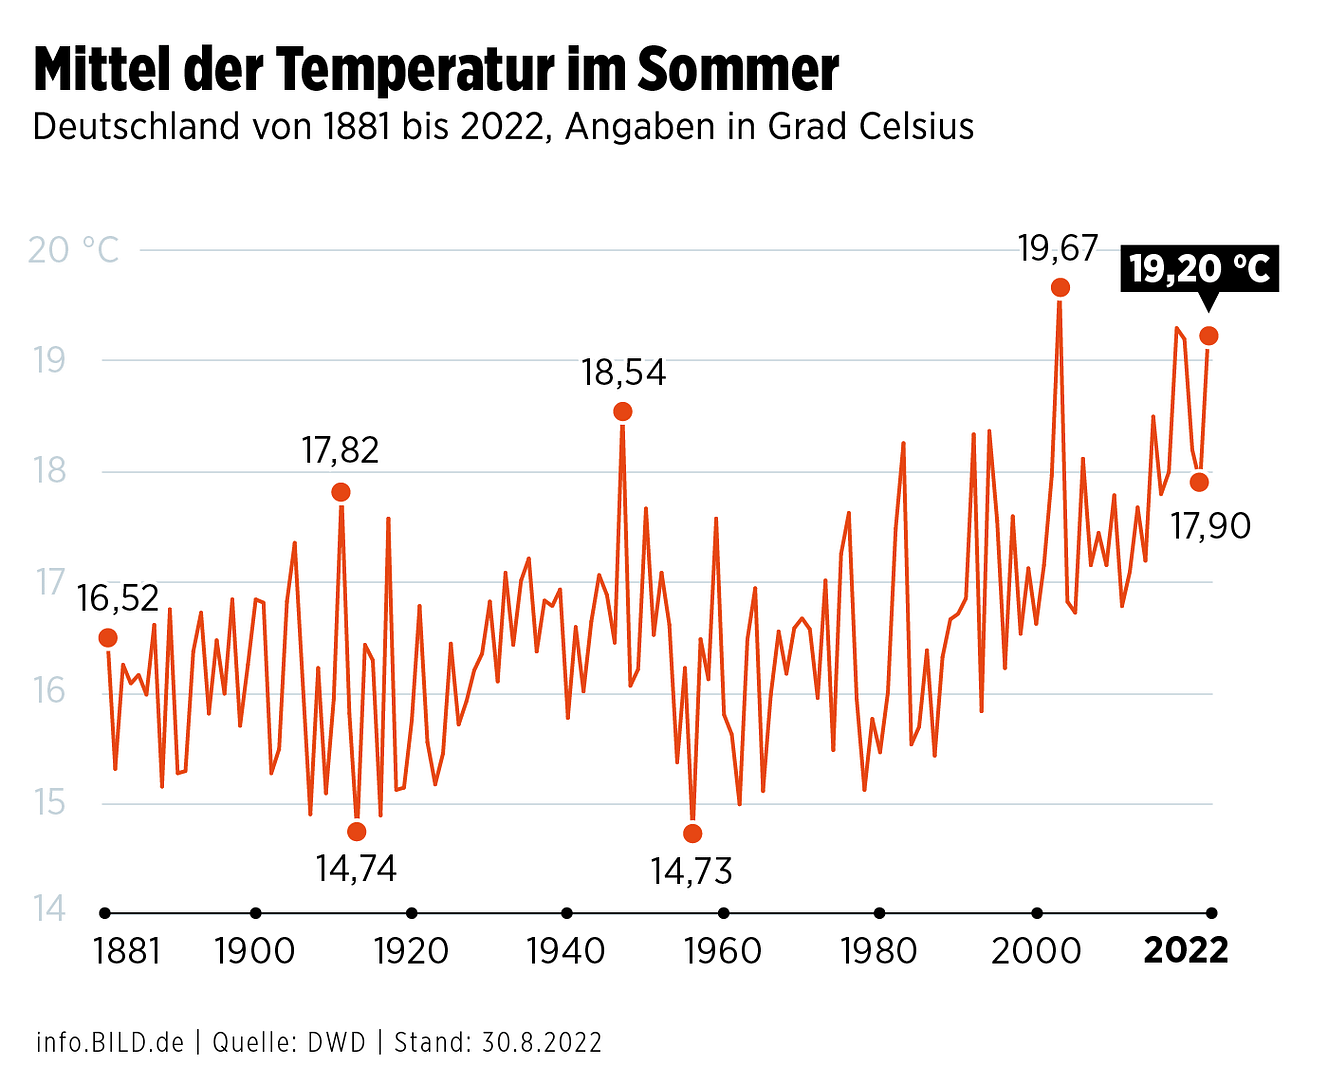 Graph: Average summer temperature in Germany from 1881 to 2022 - graph